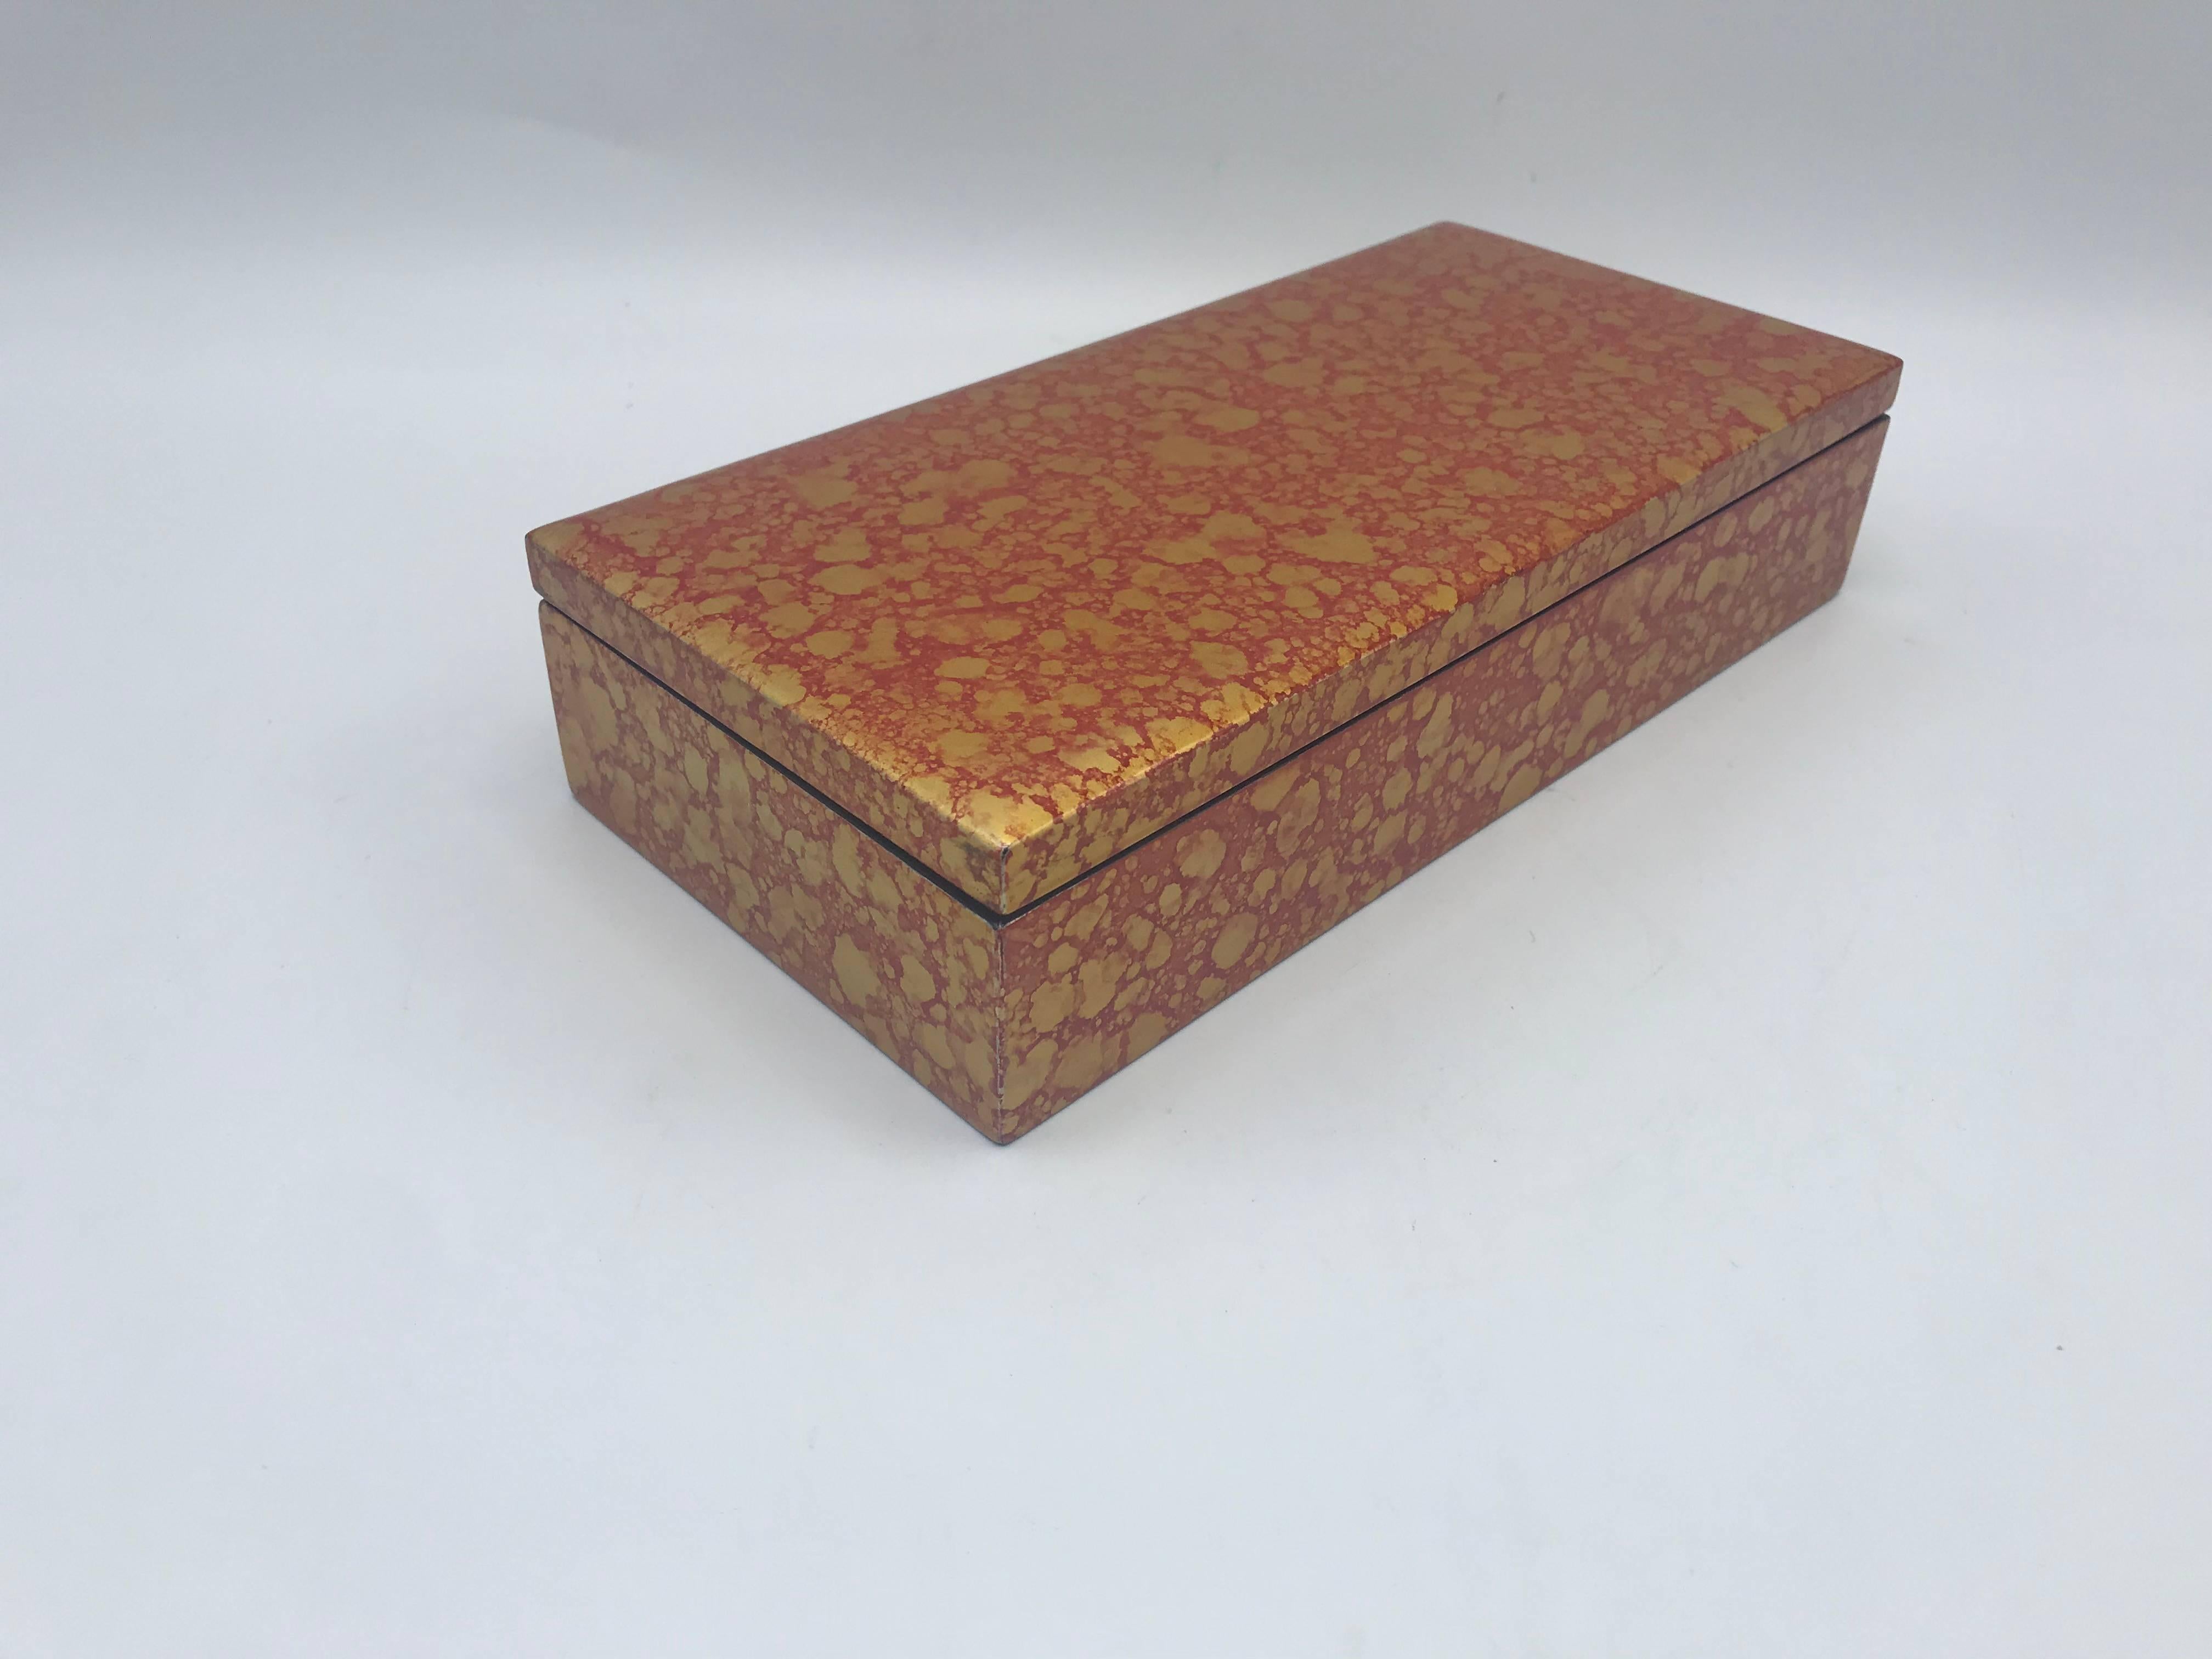 Offered is a fabulous, 1970s chinoiserie red and gold lacquered box. Hinged and lidded.